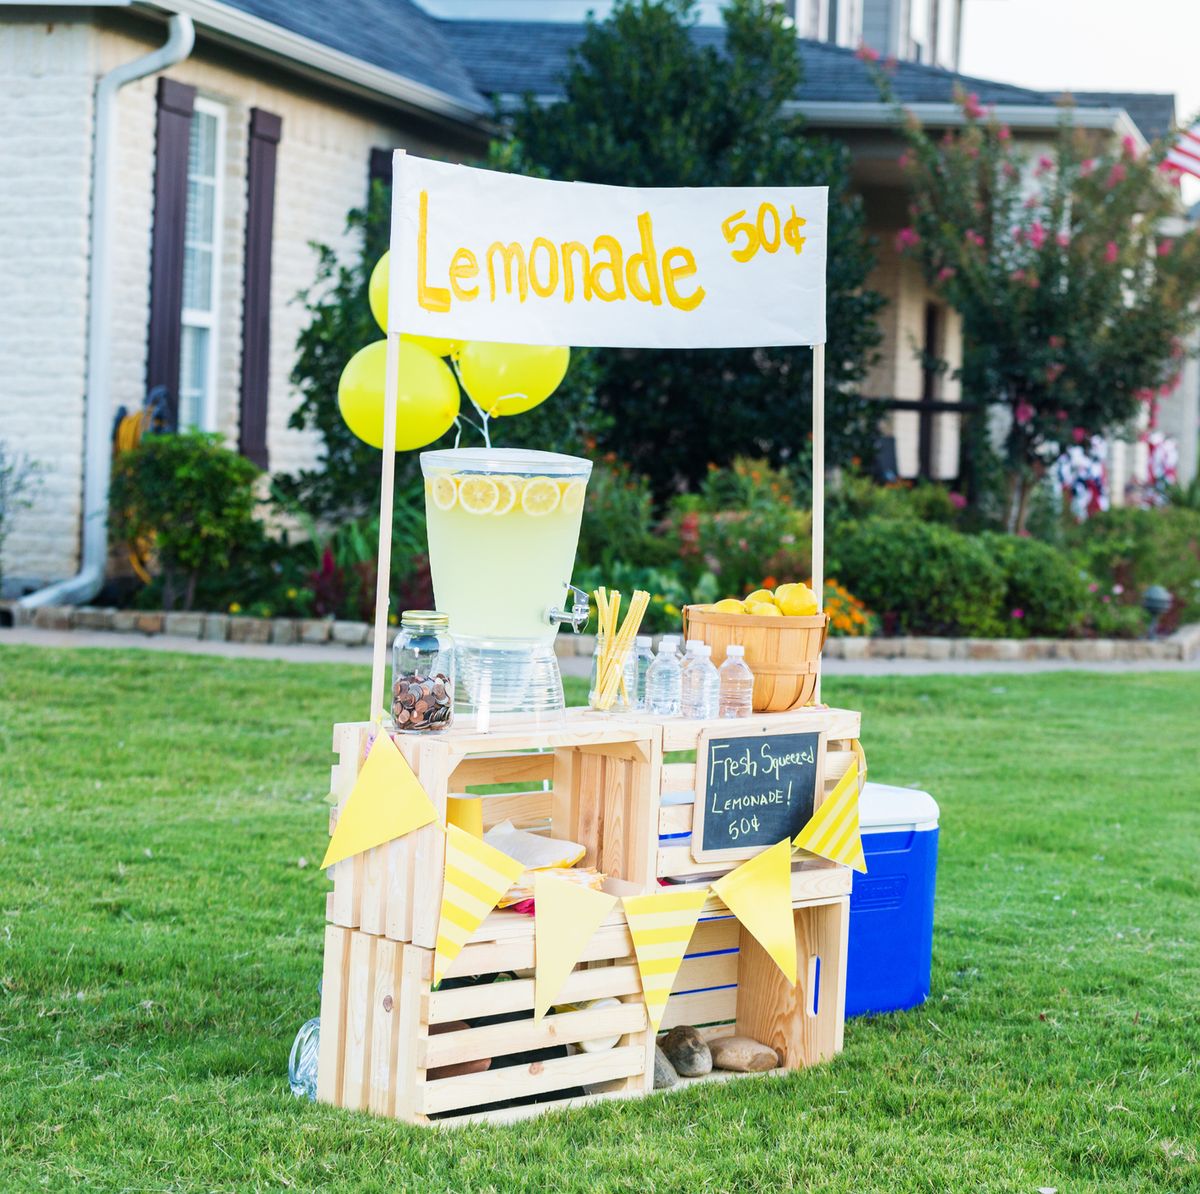 Lemonade stand set up in front yard